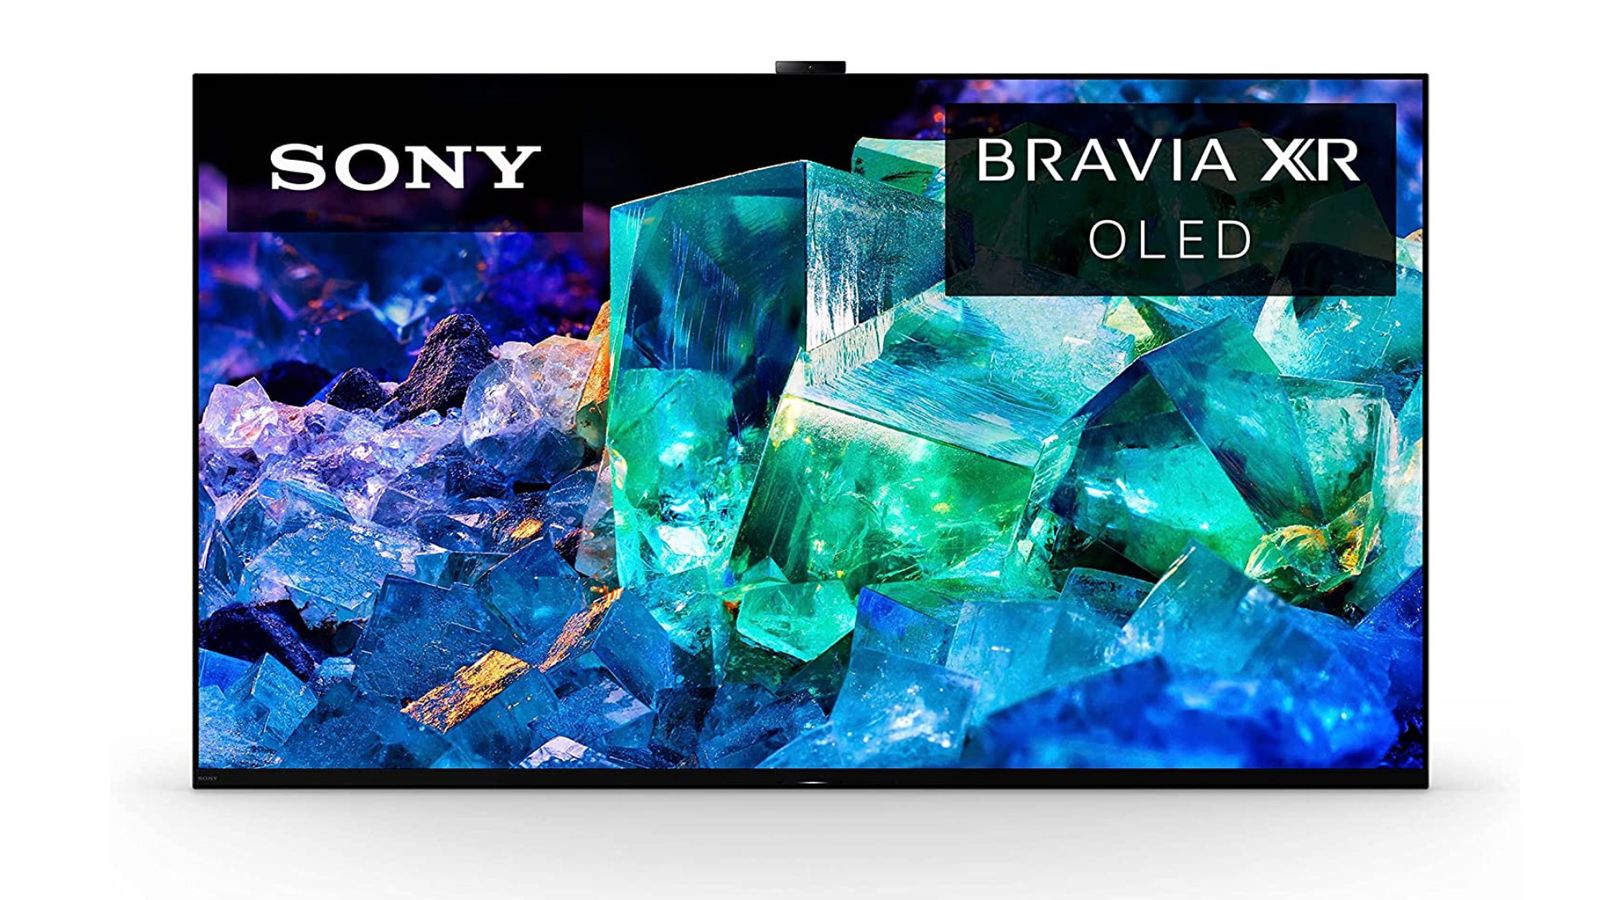 Sony Bravia XR A95K product image of a standless TV with turquoise crystals on the display.